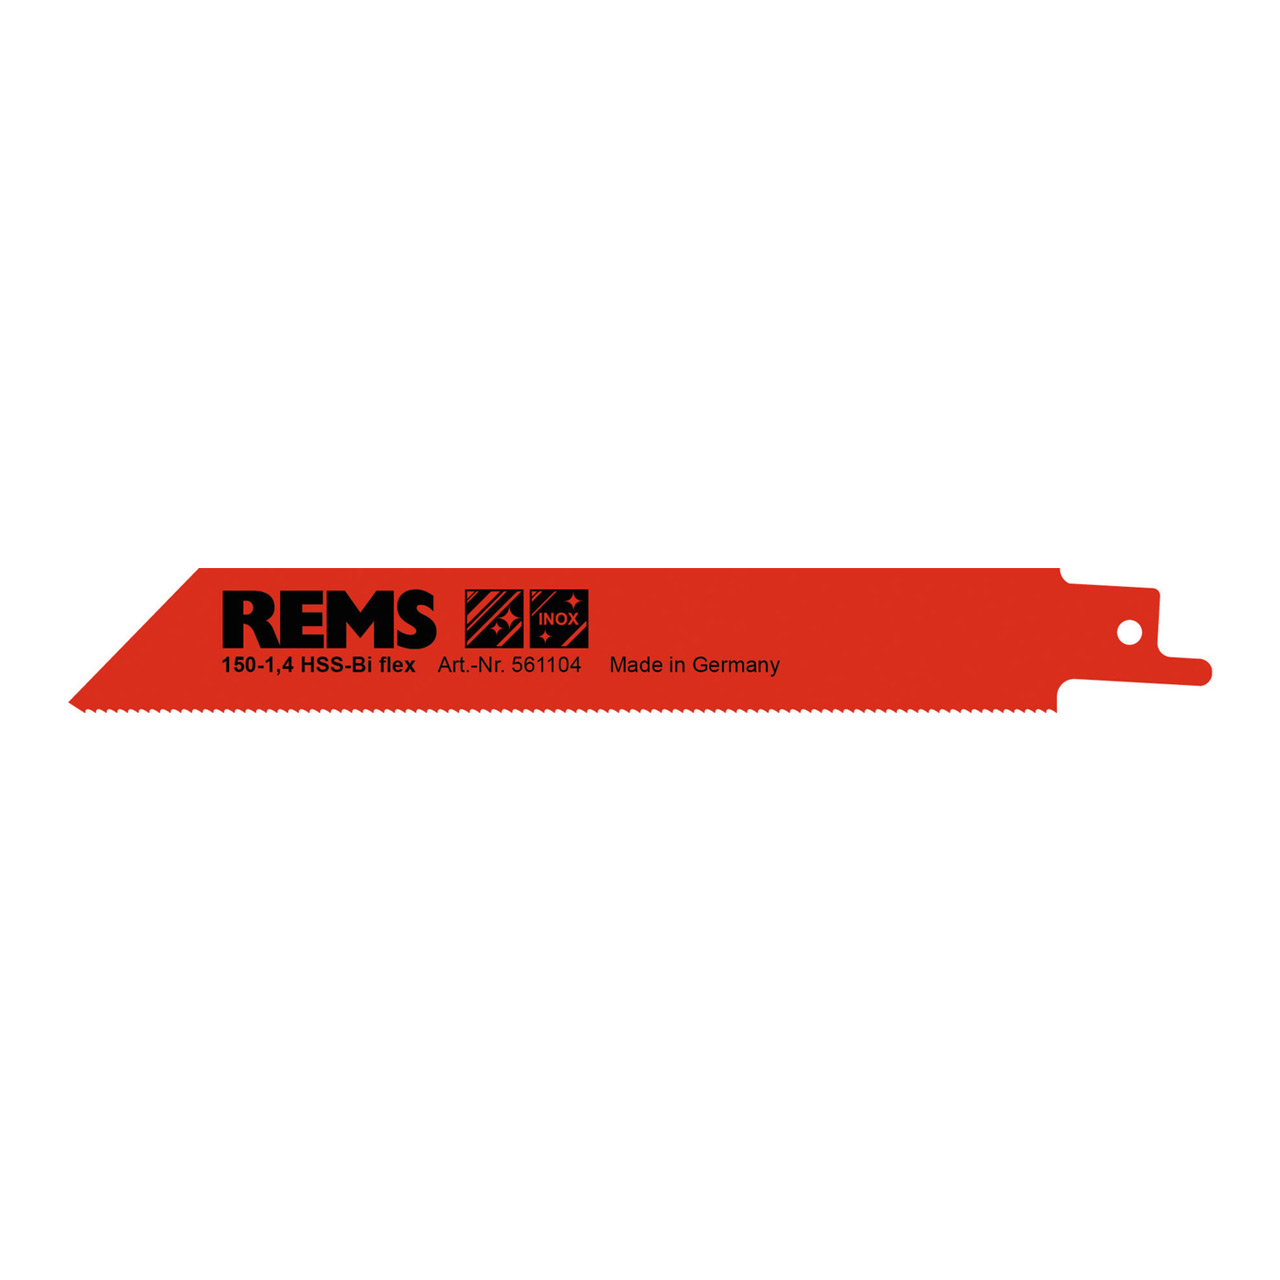 REMS Steel Saw Blade 150-1 Pack of 5